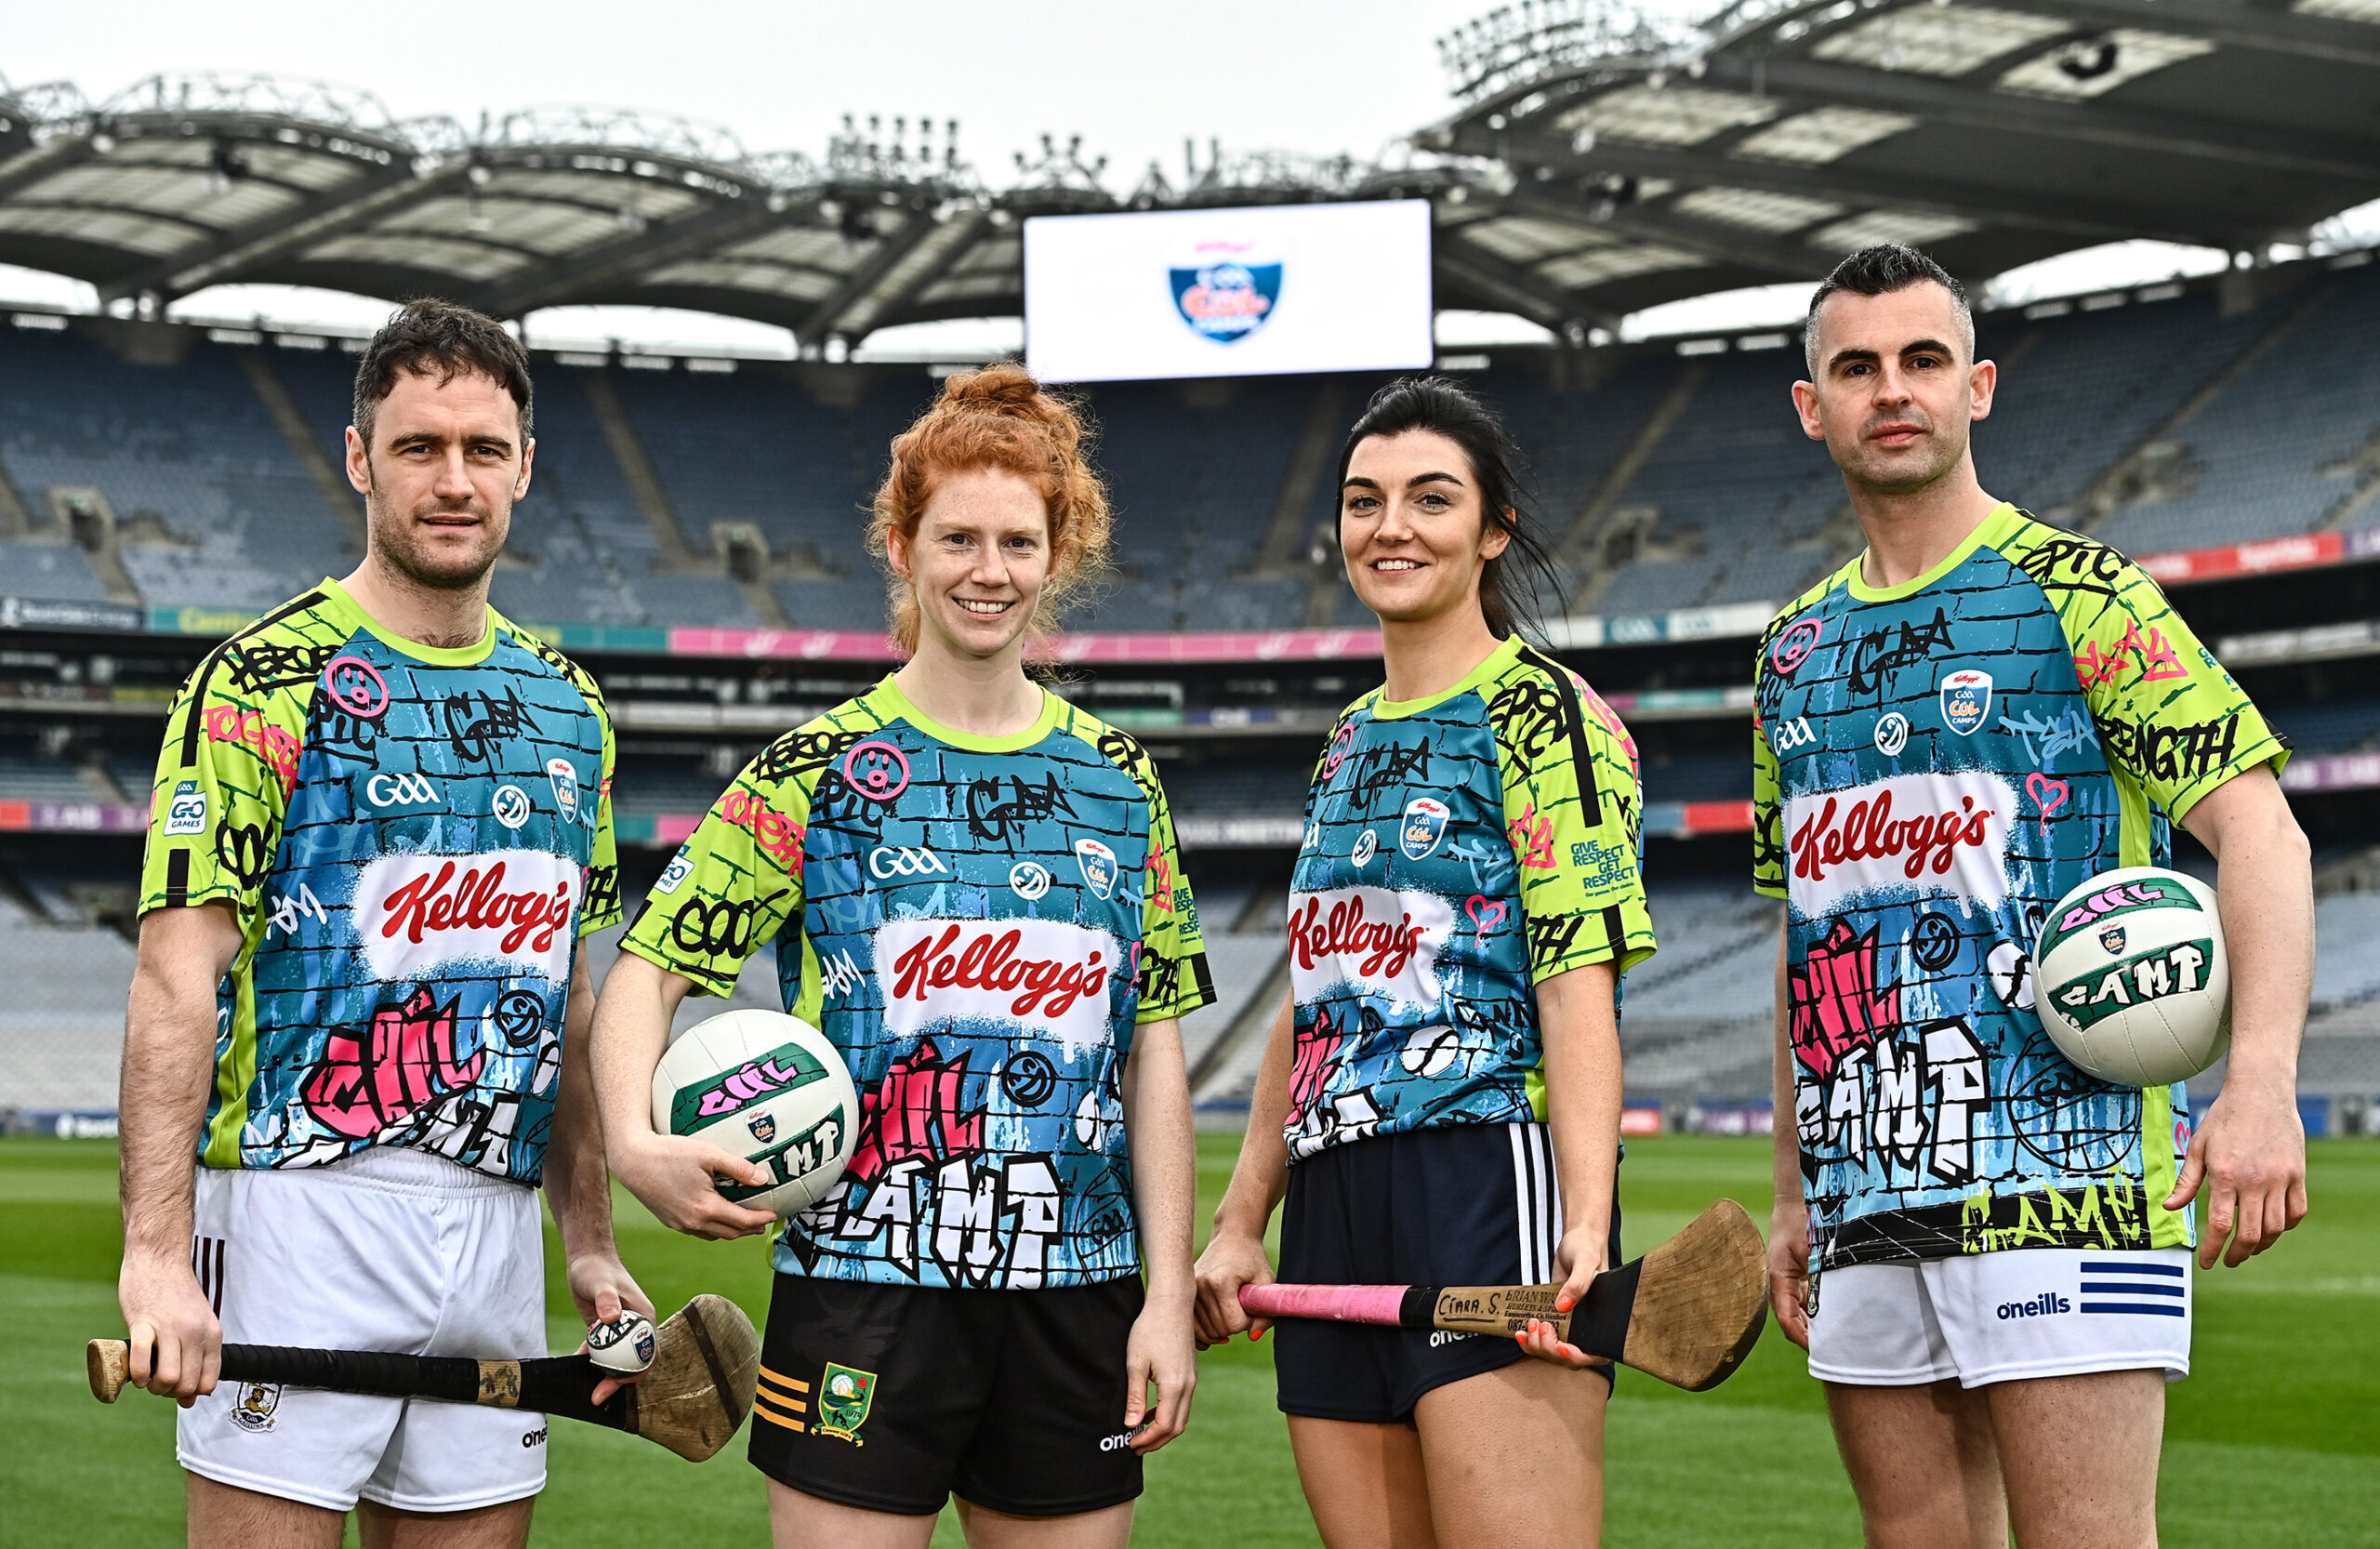 €40,000 up for grabs for Monaghan GAA clubs through Kellogg’s GAA Cúl Camps on-pack competition